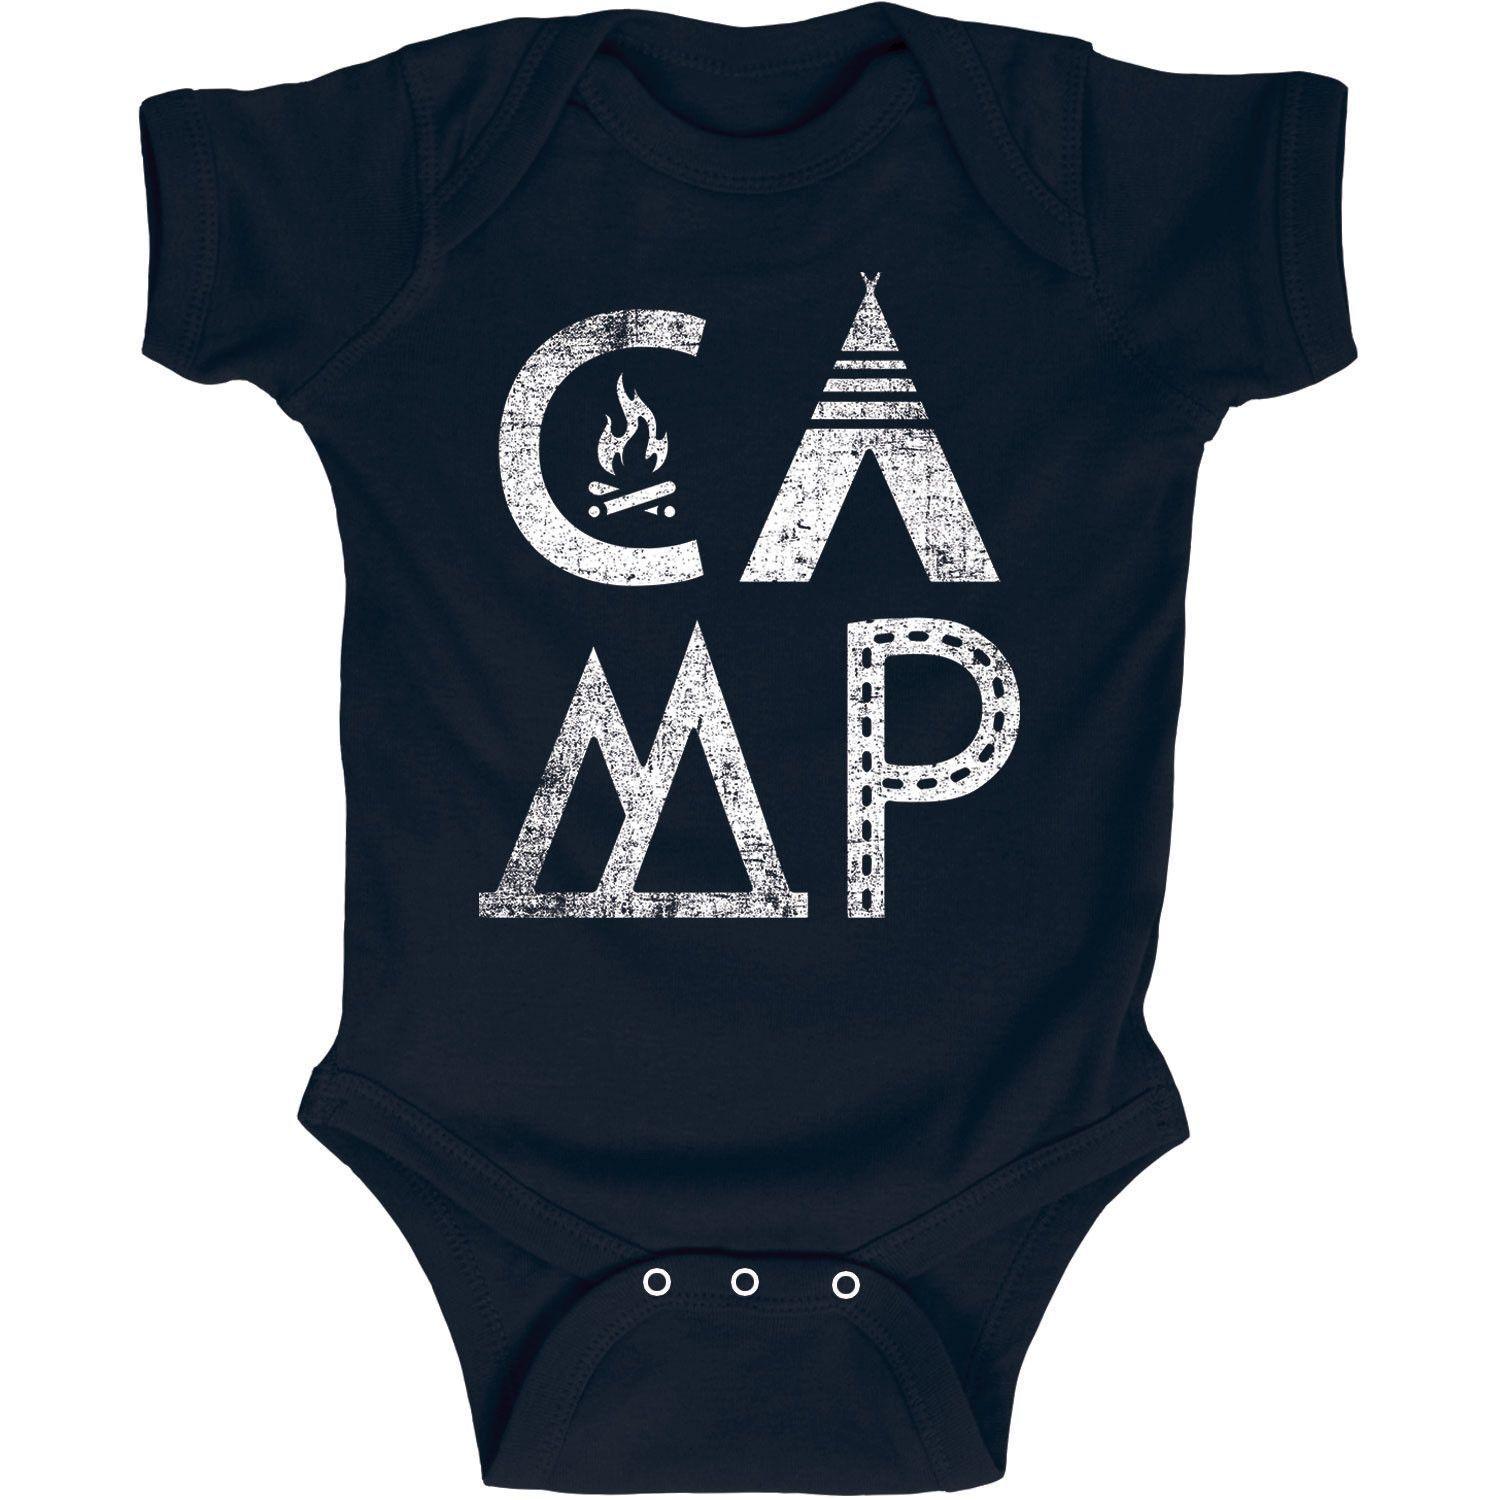 Cool Camp Logo - Here's a cool camping idea. Camping shirts for the kids on your next